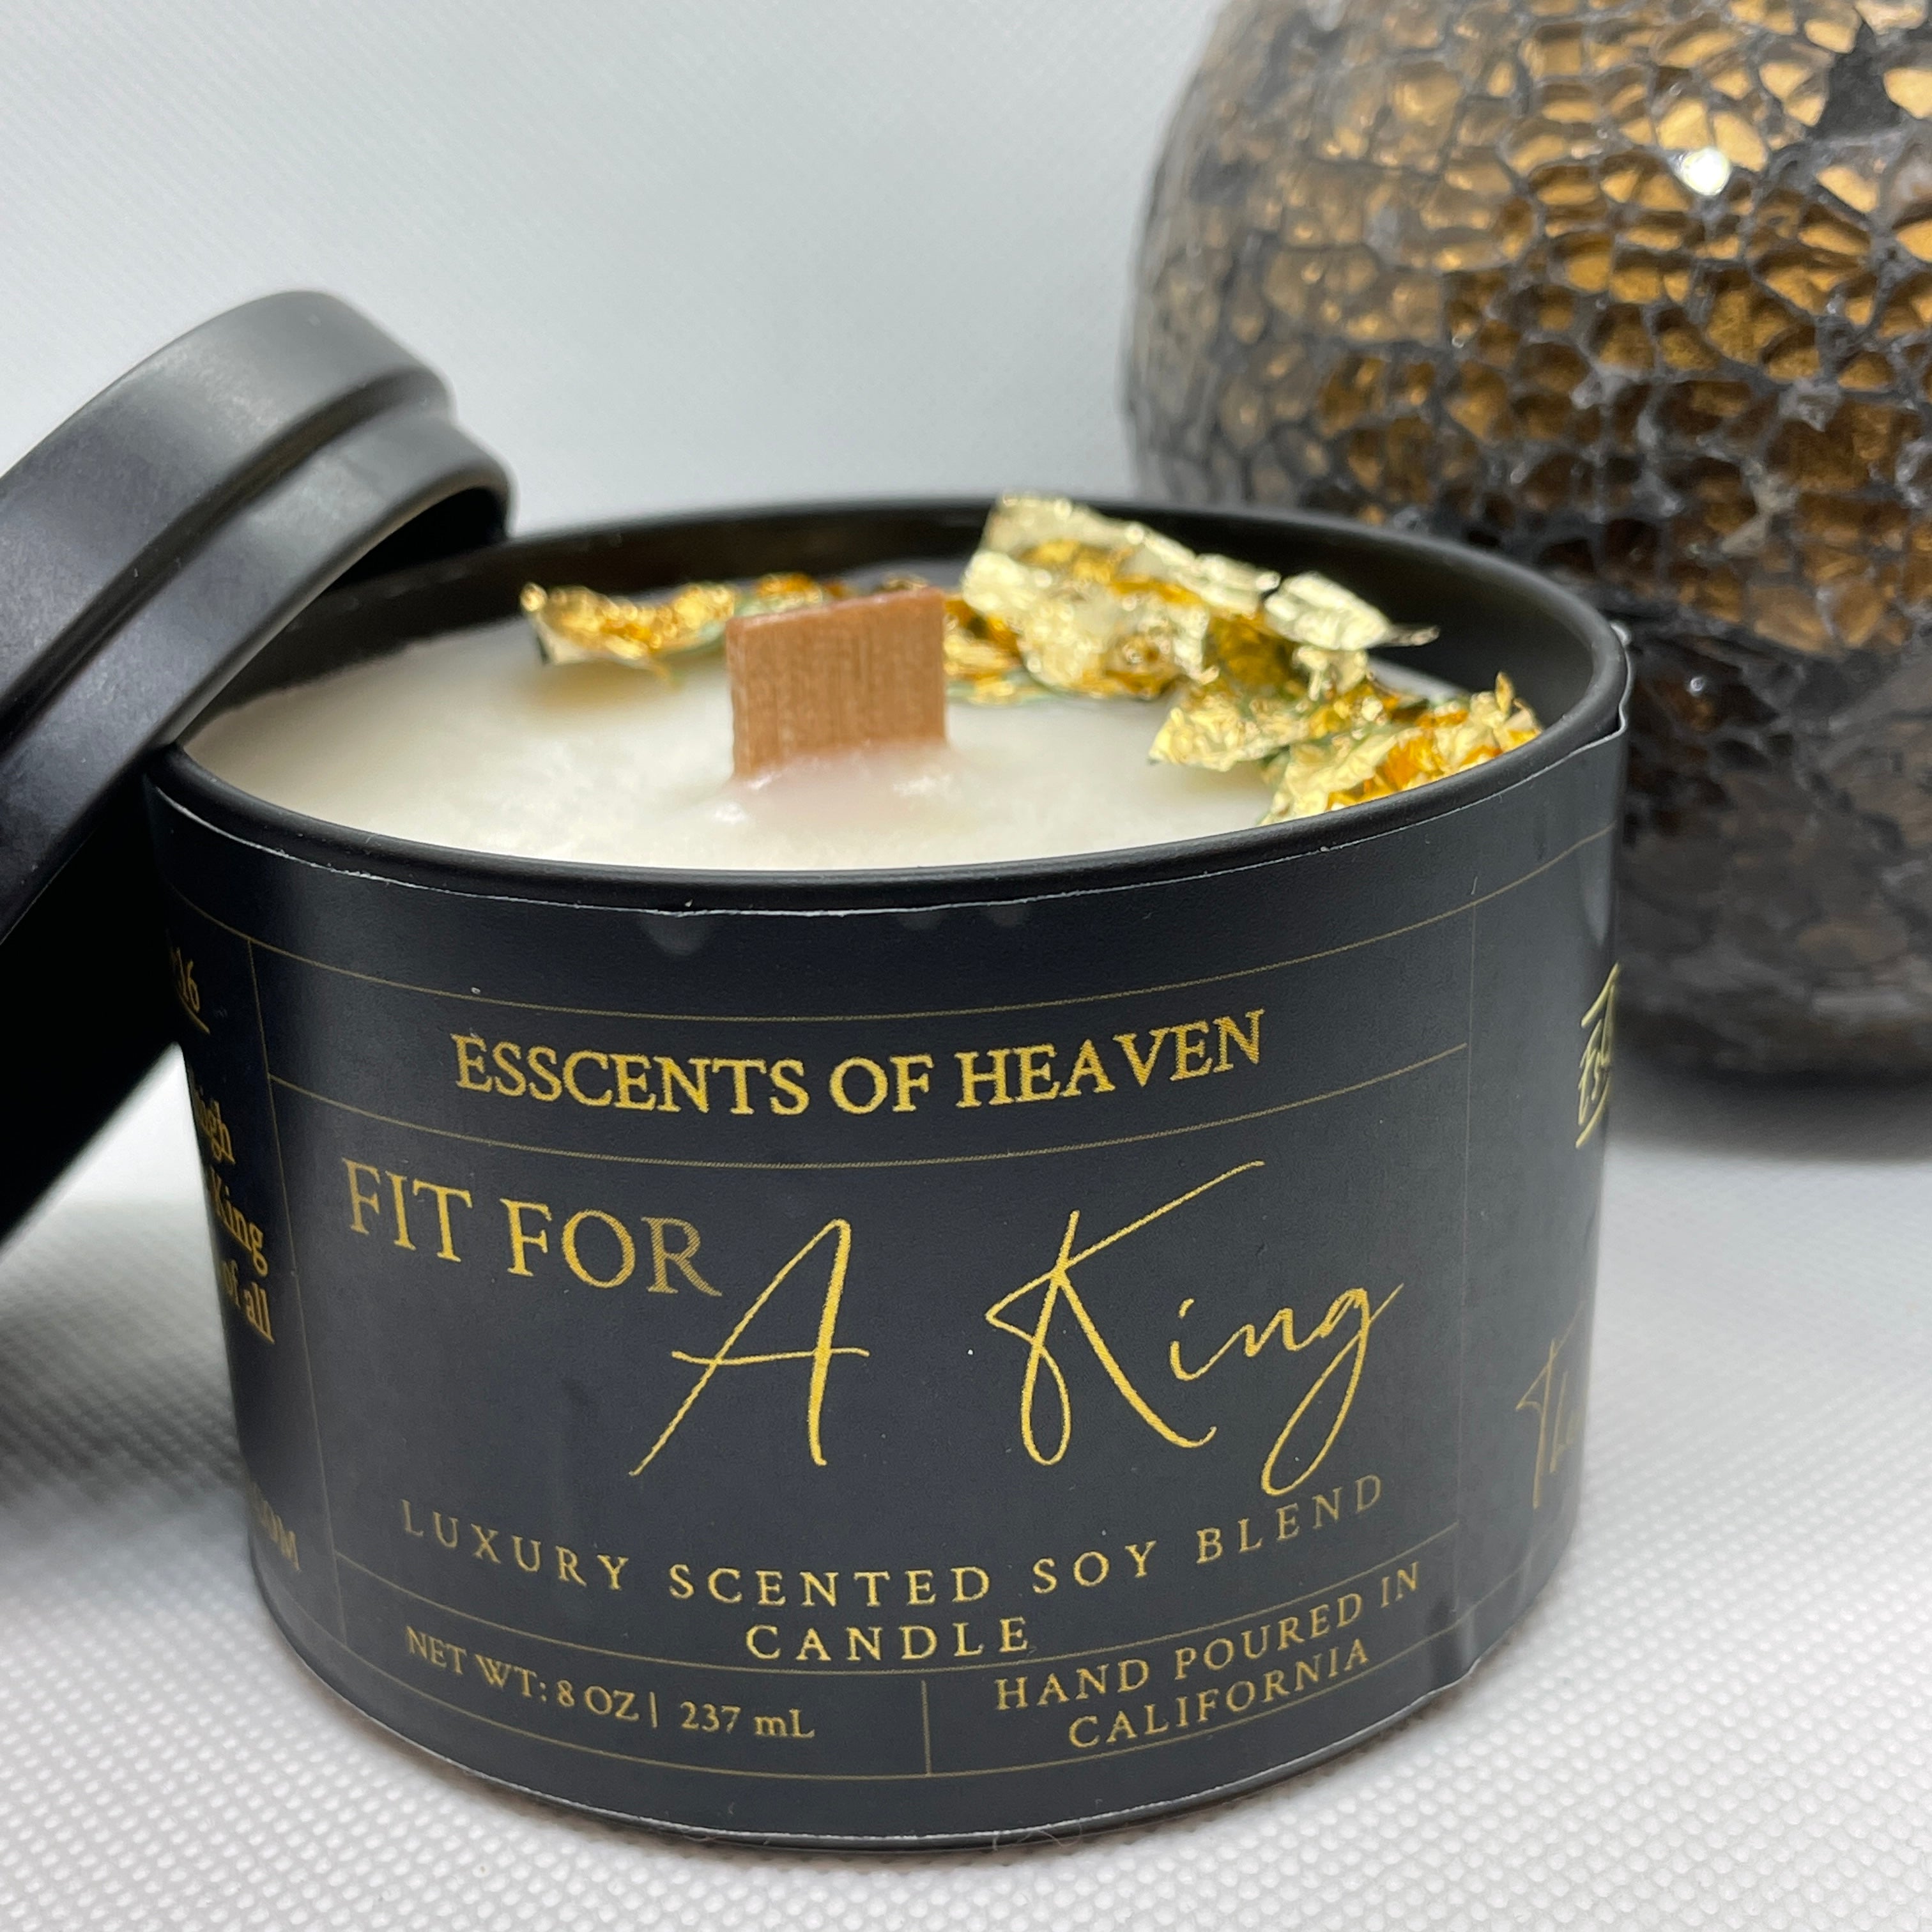 "Fit for A King" Gold Leaf Candle